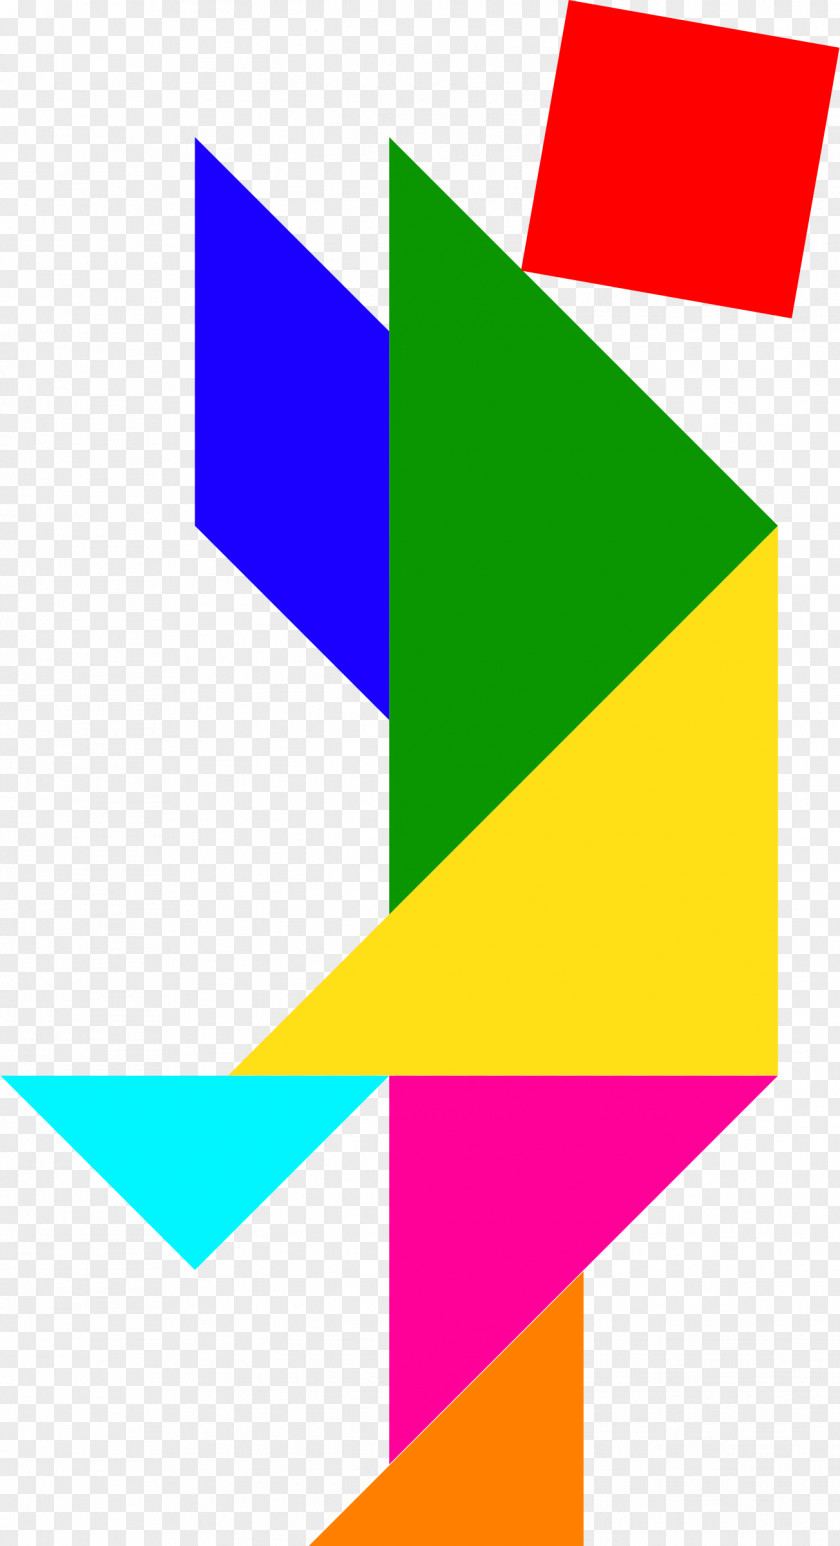 Shapes Tangram Square Graphic Design Triangle PNG